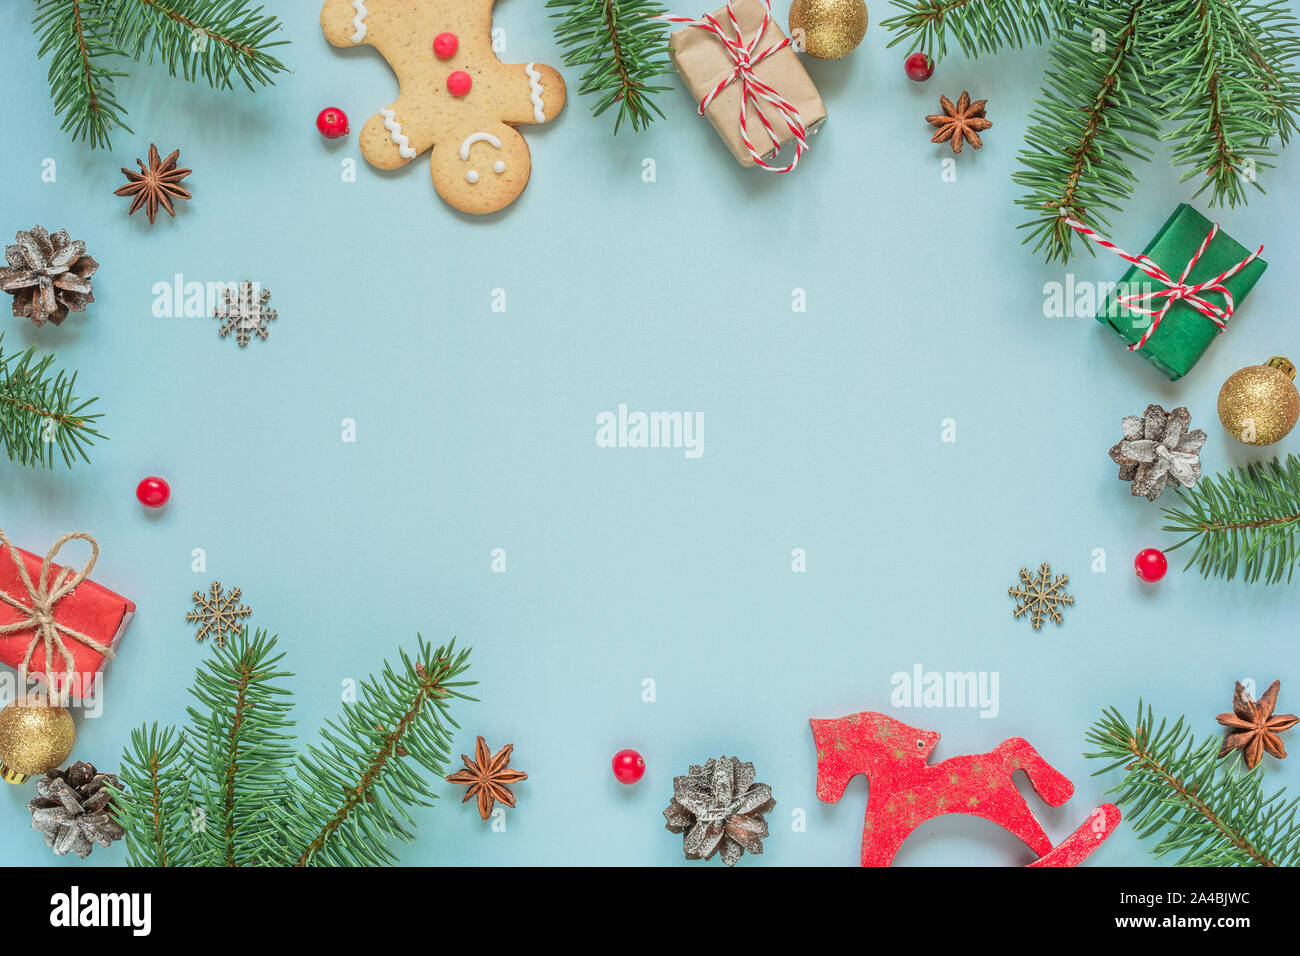 Christmas composition. frame made of fir tree branches, decorations, berries, gingerbread and pine cones on blue background. Christmas background. Fla Stock Photo